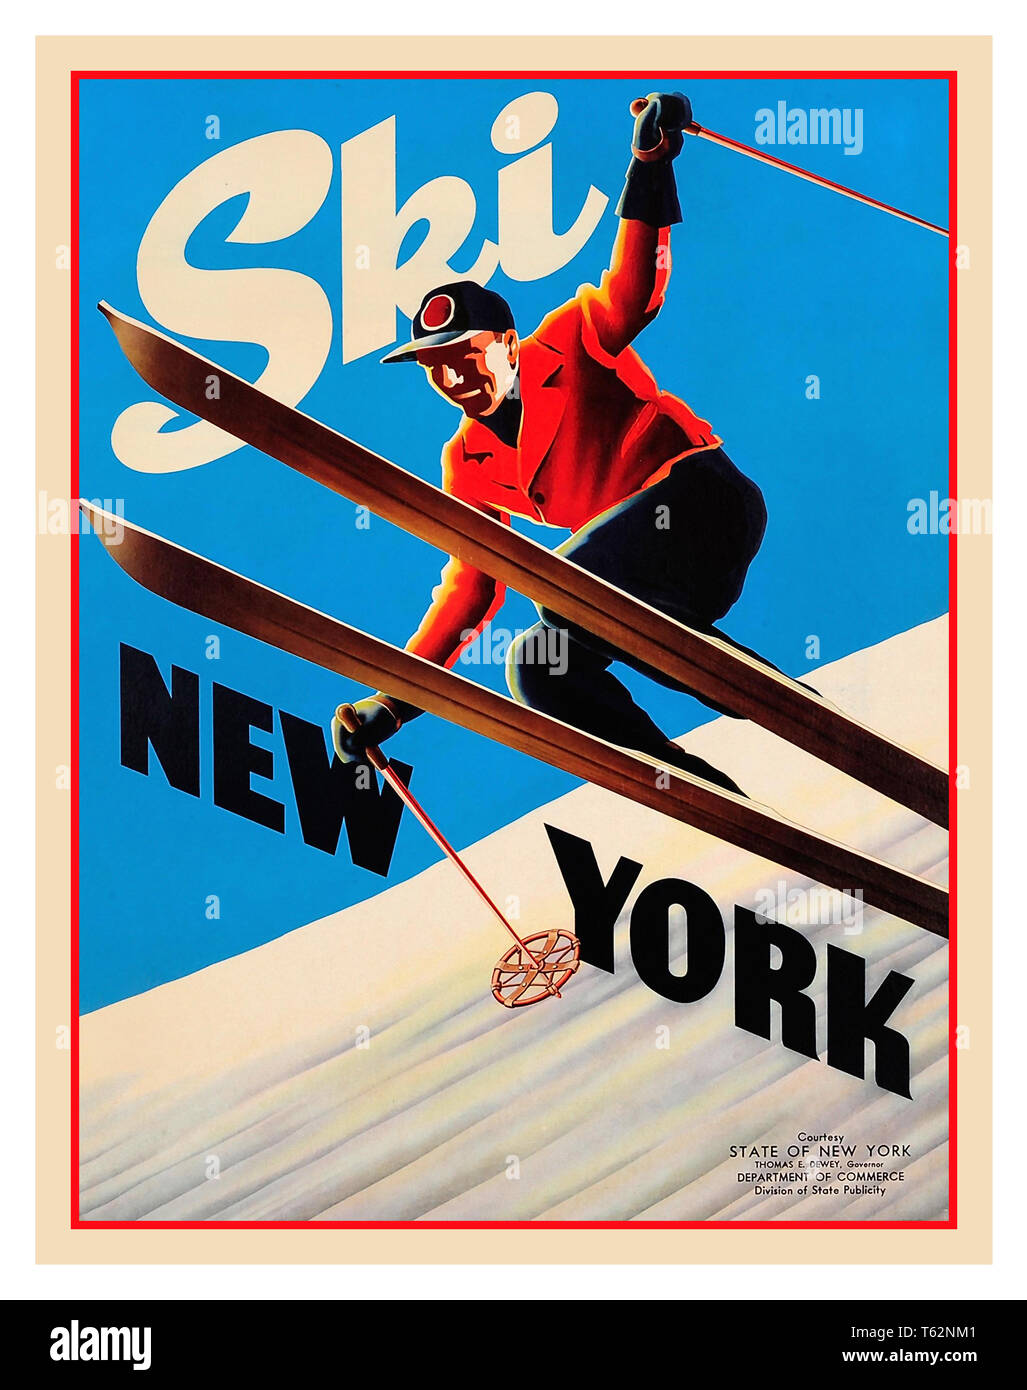 1940's Vintage Skiing Poster 'Ski New York' State of New York Publicity Department New York USA Stock Photo